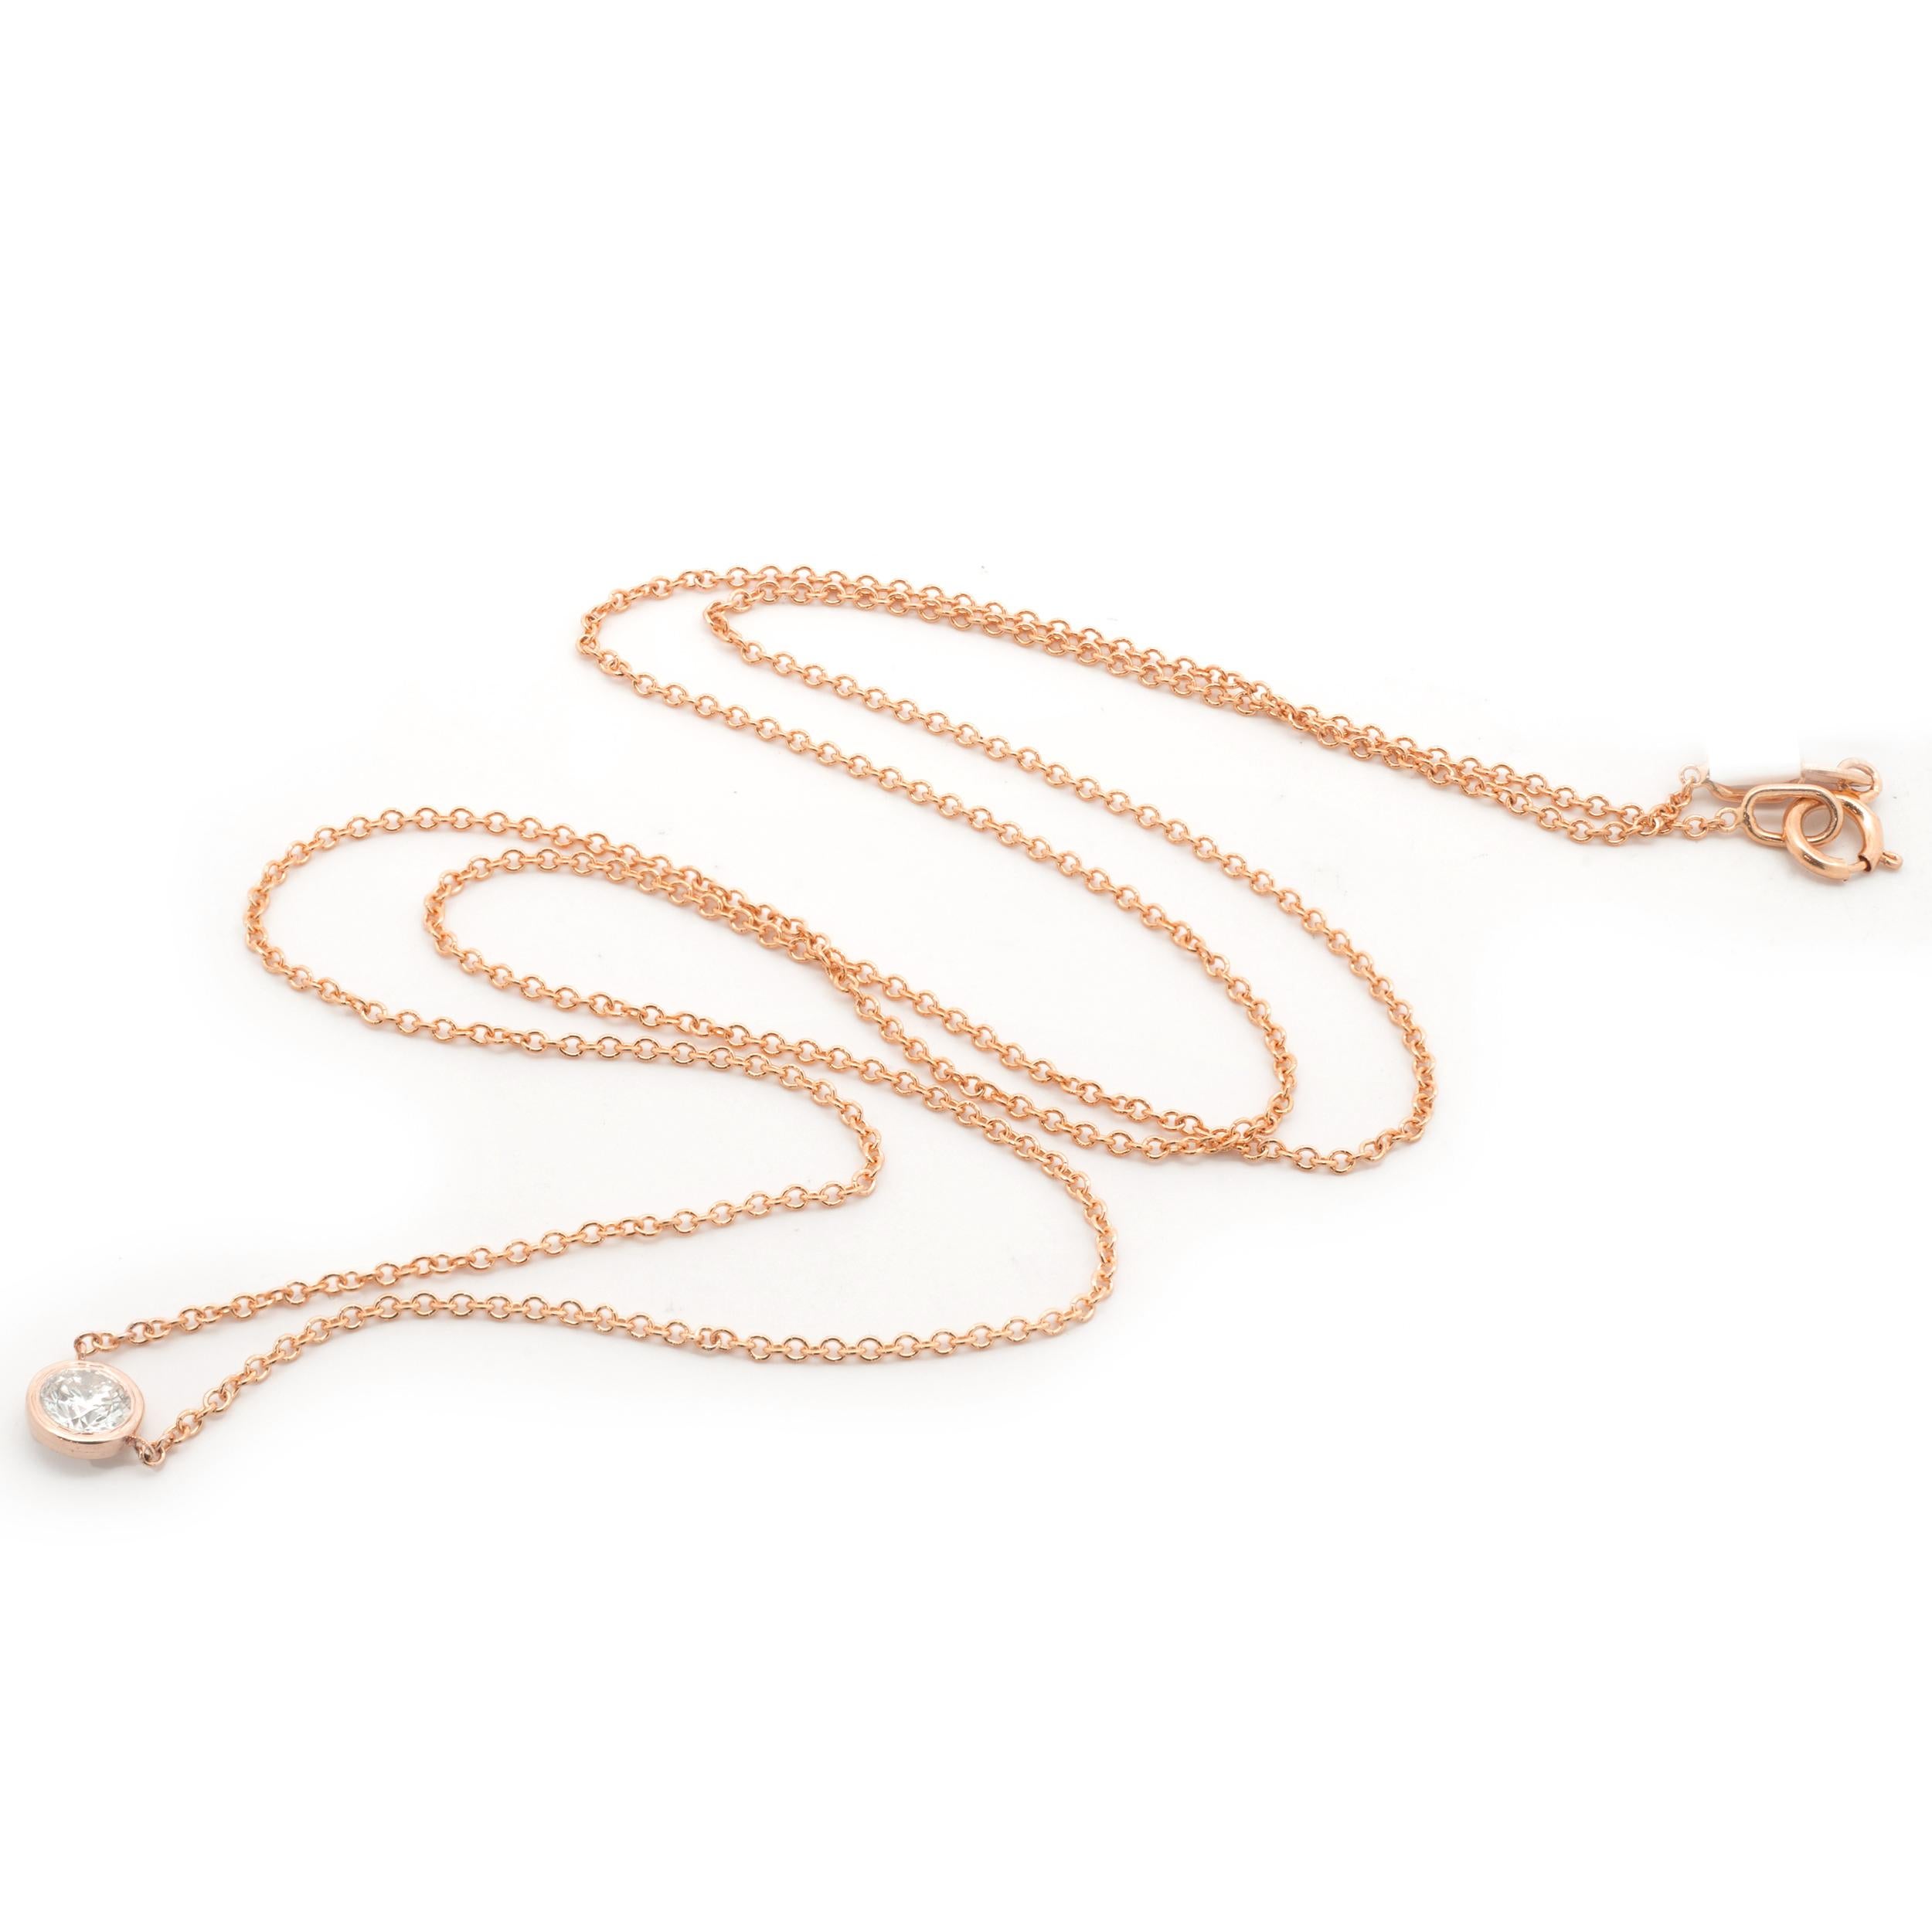 Designer: custom design
Material: 14K rose gold
Diamonds: 1 round brilliant cut = 0.17cttw
Color: G
Clarity: SI1
Dimensions: necklace measures 16-inches in length 
Weight: 1.37 grams
